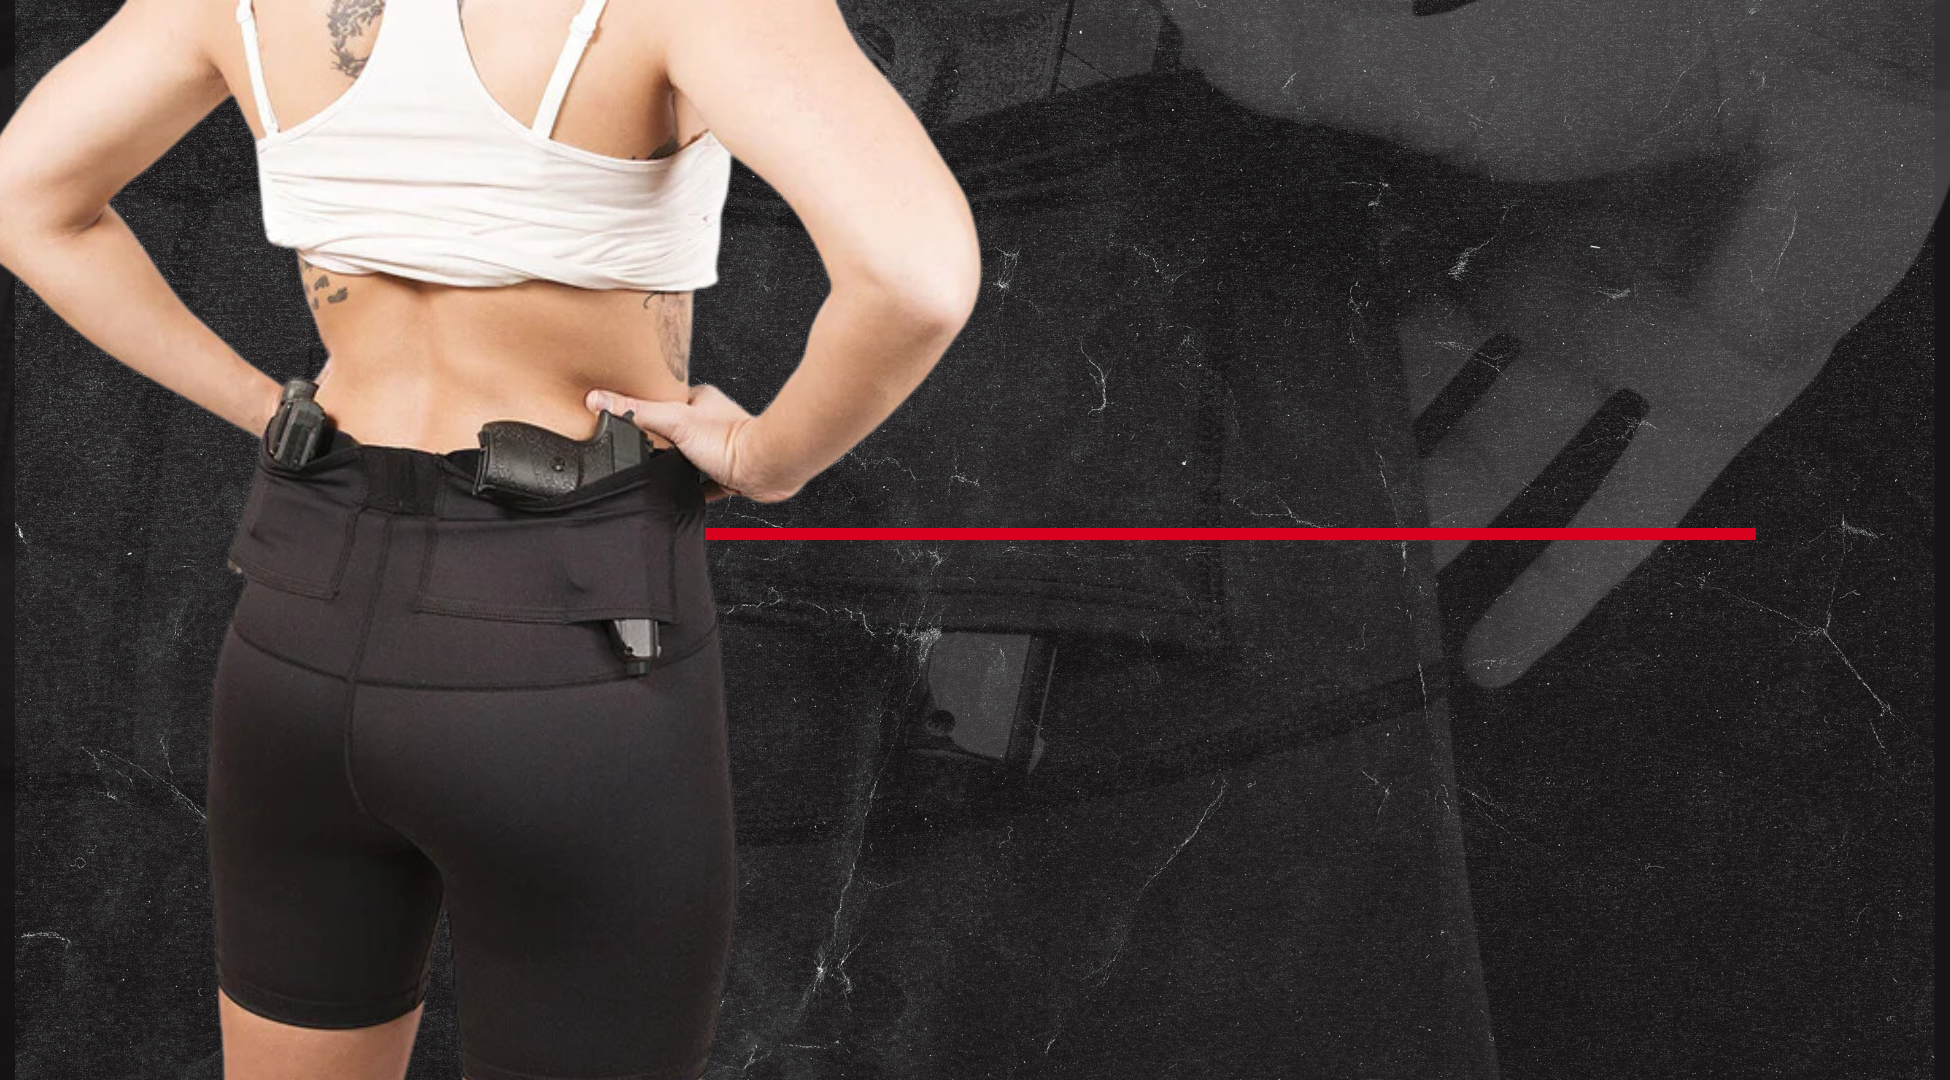 Concealed Carry Clothing and Holsters for Women, 5.11 Tactical